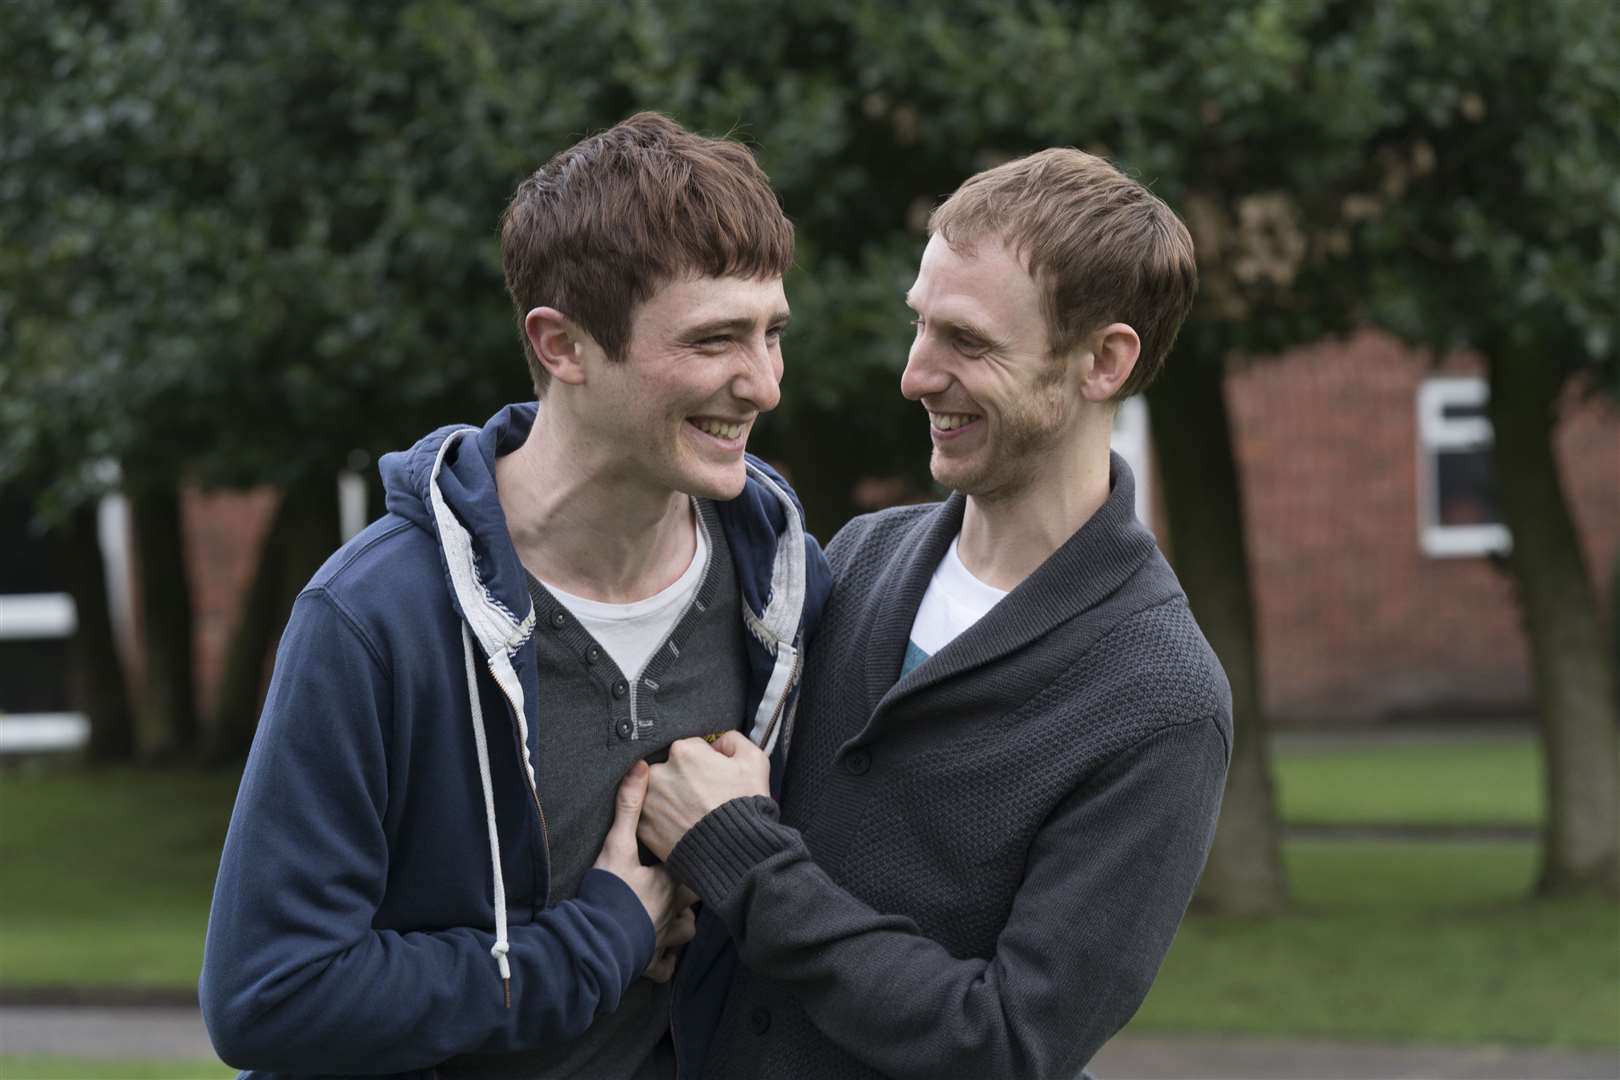 TV drama Four Lives will focus on the victims of killer Stephen Port. Image from ITV Studios - Photographer: Aimee Spinks